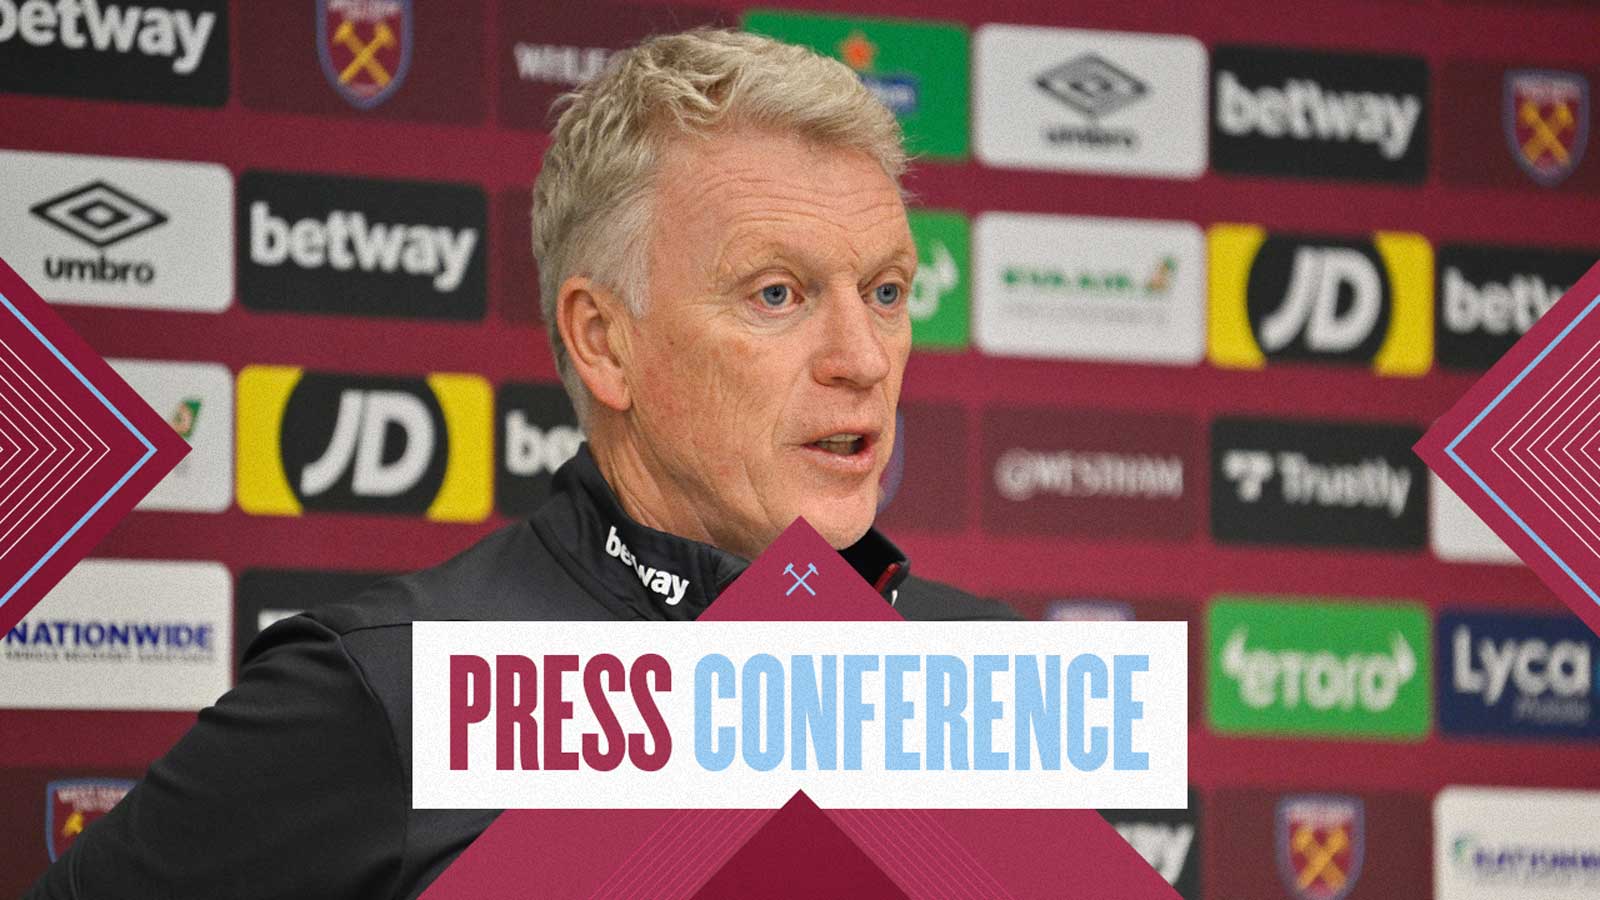 David Moyes speaks at a press conference